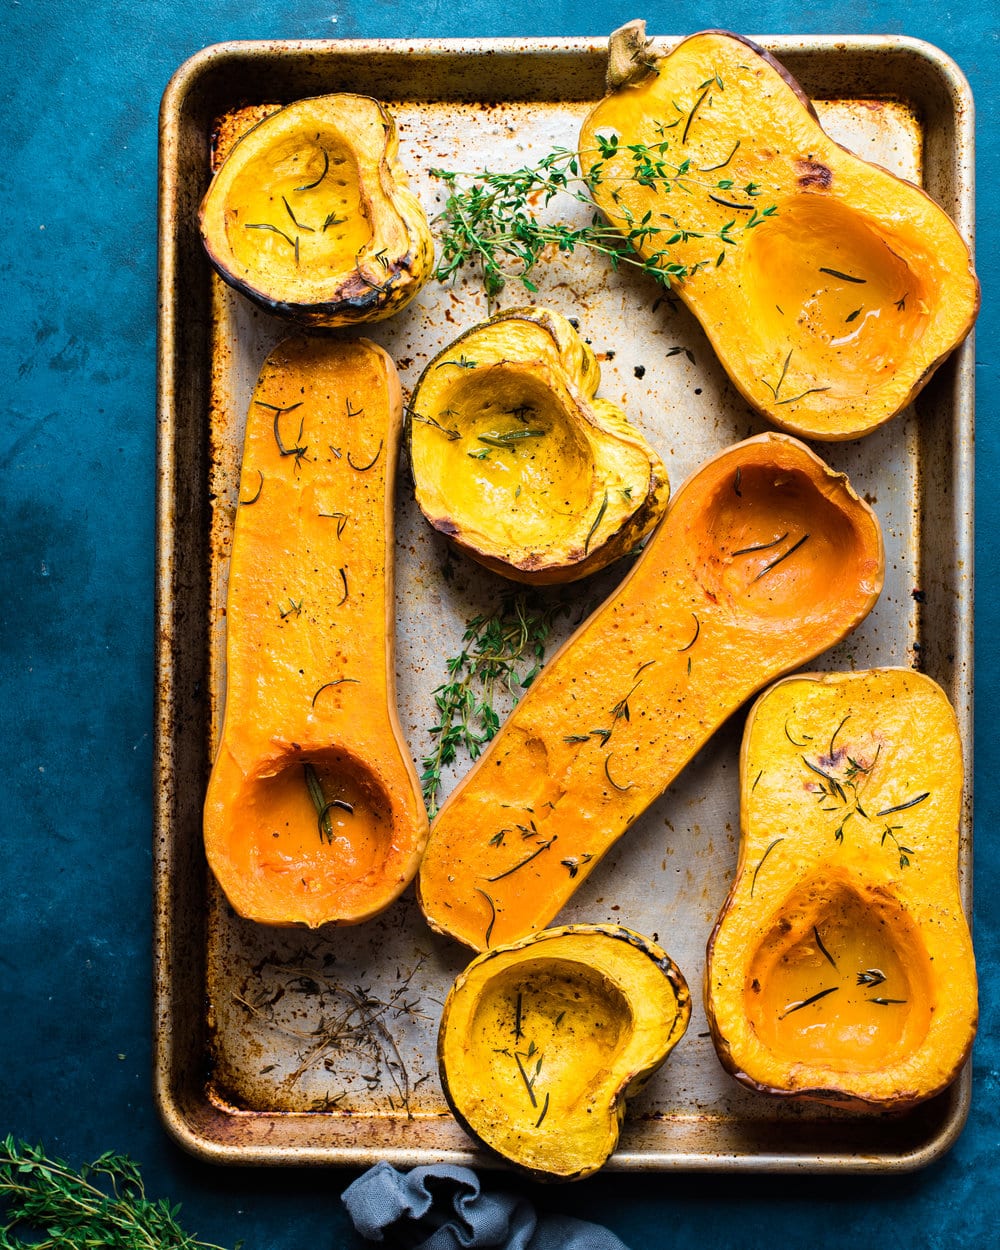 Seven roasted squash halves on a baking sheet on a blue table.